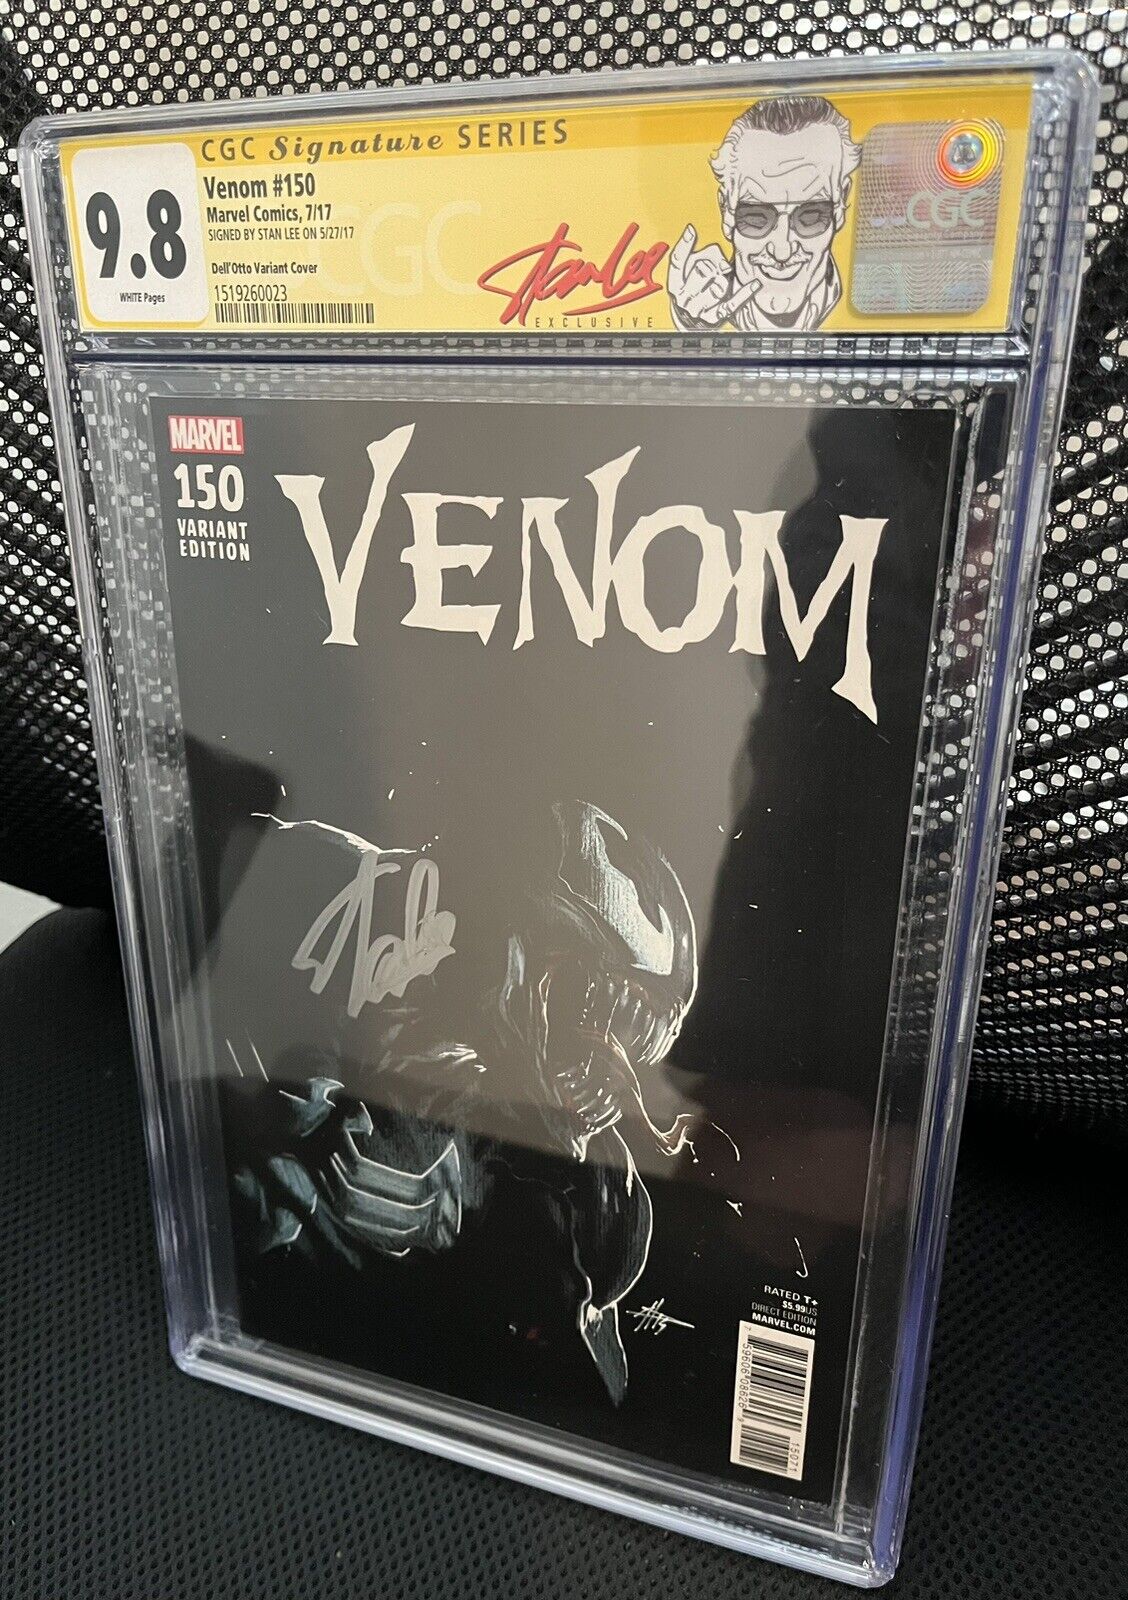 VENOM #150 CGC SS 9.8 Signed by Stan Lee. Dell'Otto Variant, Marvel Comics Rare